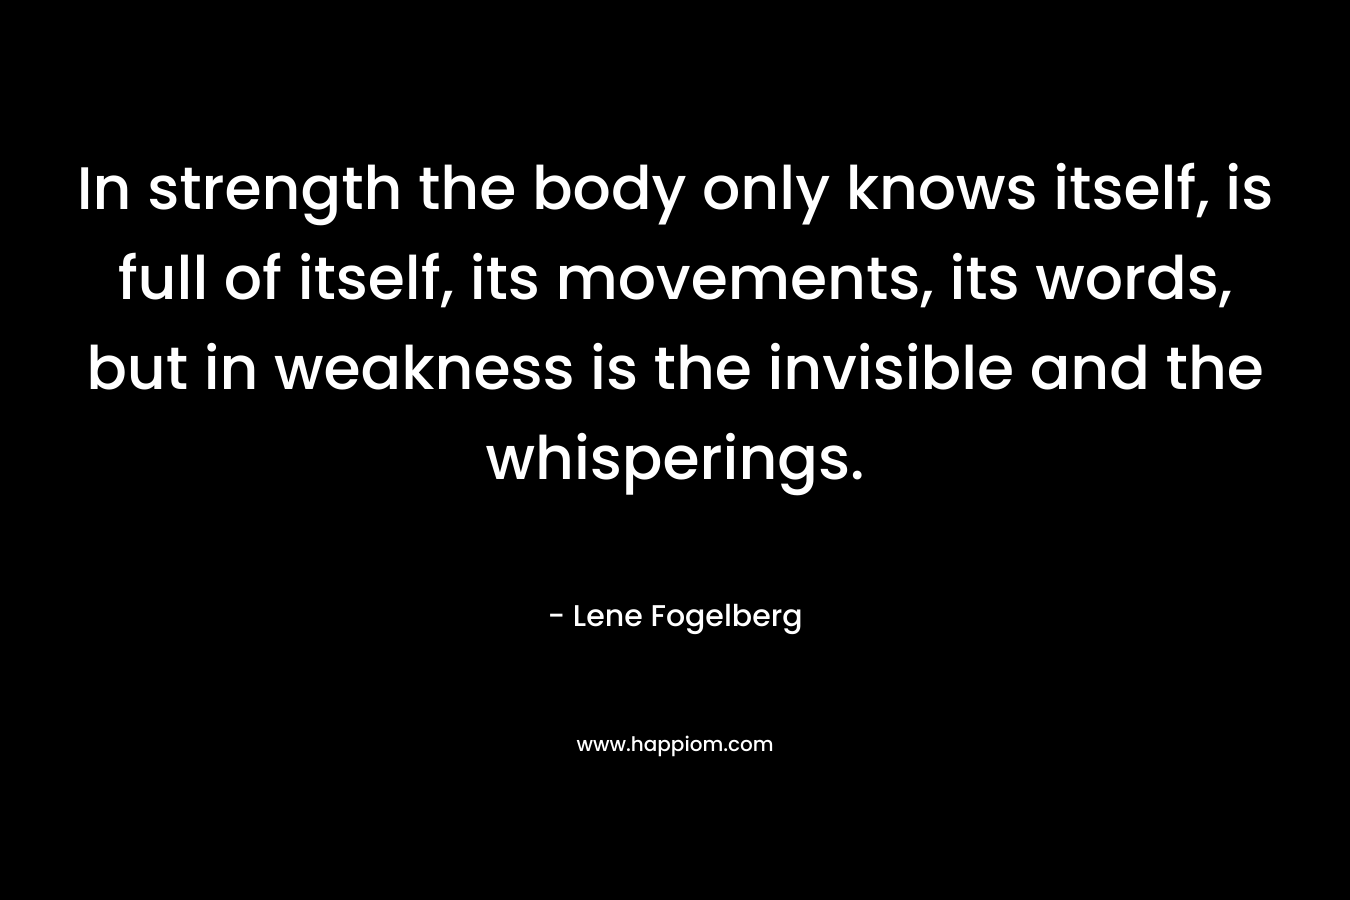 In strength the body only knows itself, is full of itself, its movements, its words, but in weakness is the invisible and the whisperings.